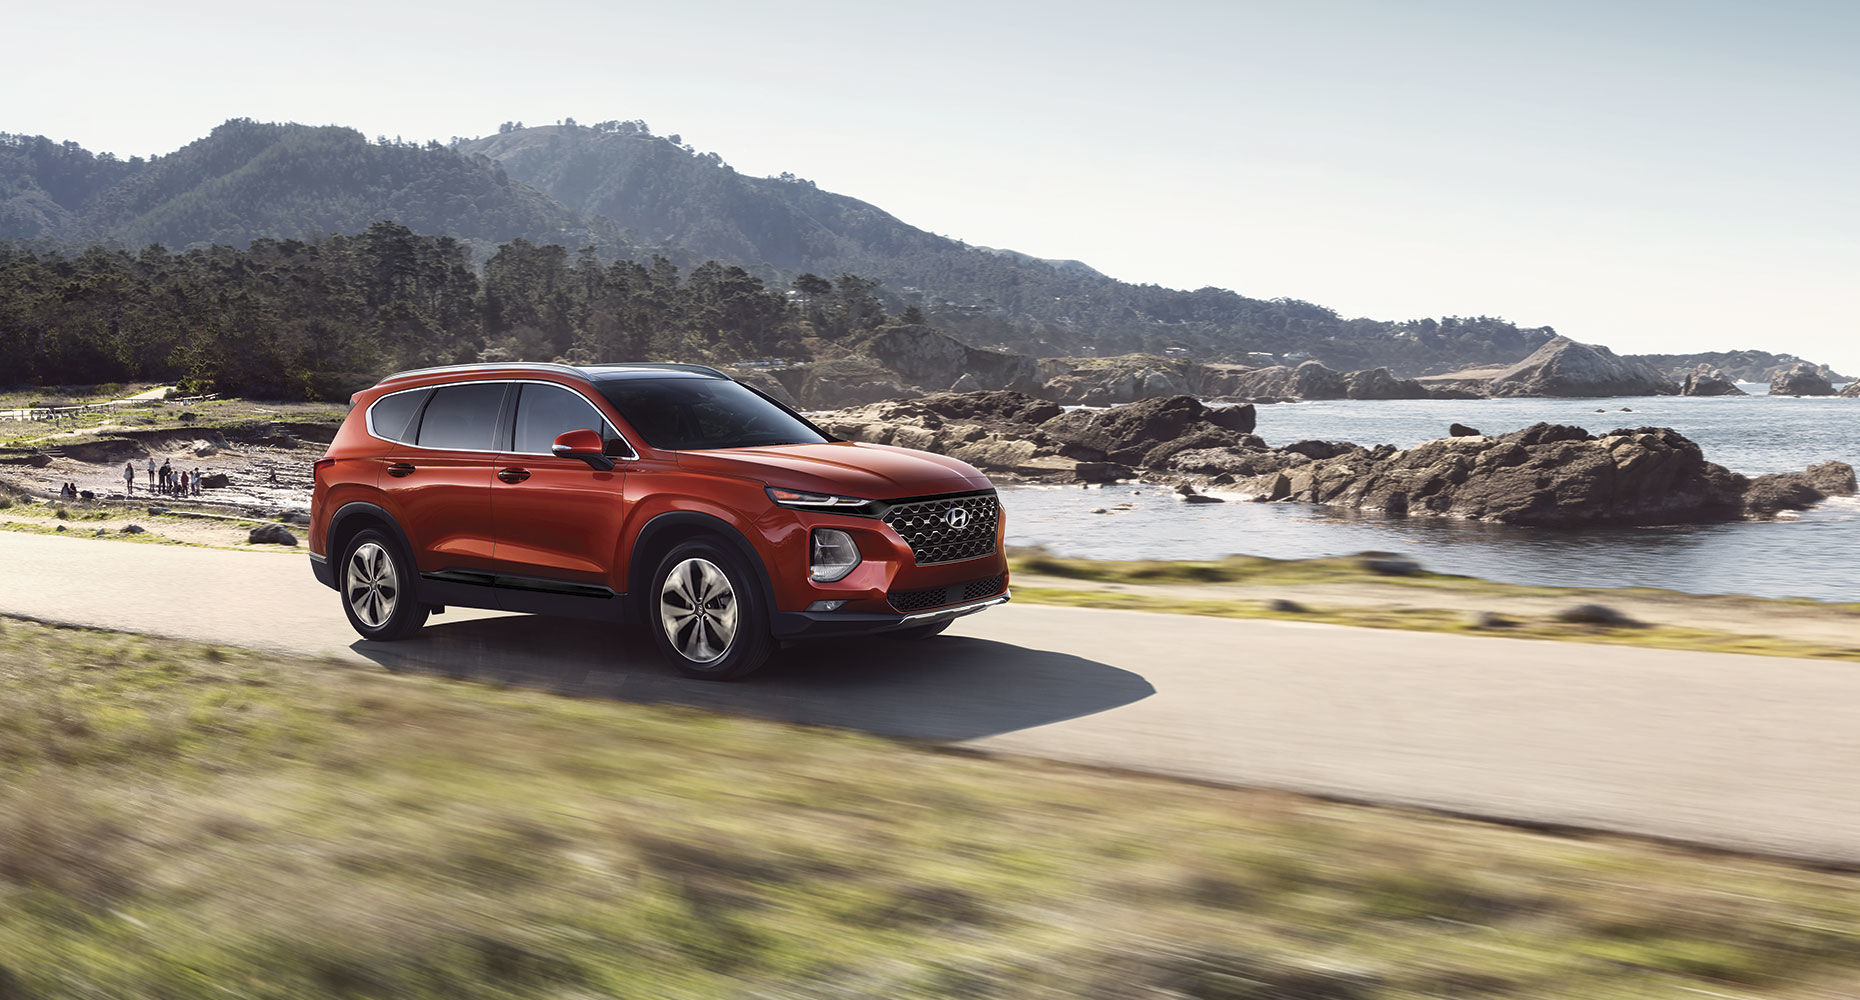 Three Things to Know About the 2019 Hyundai Santa Fe